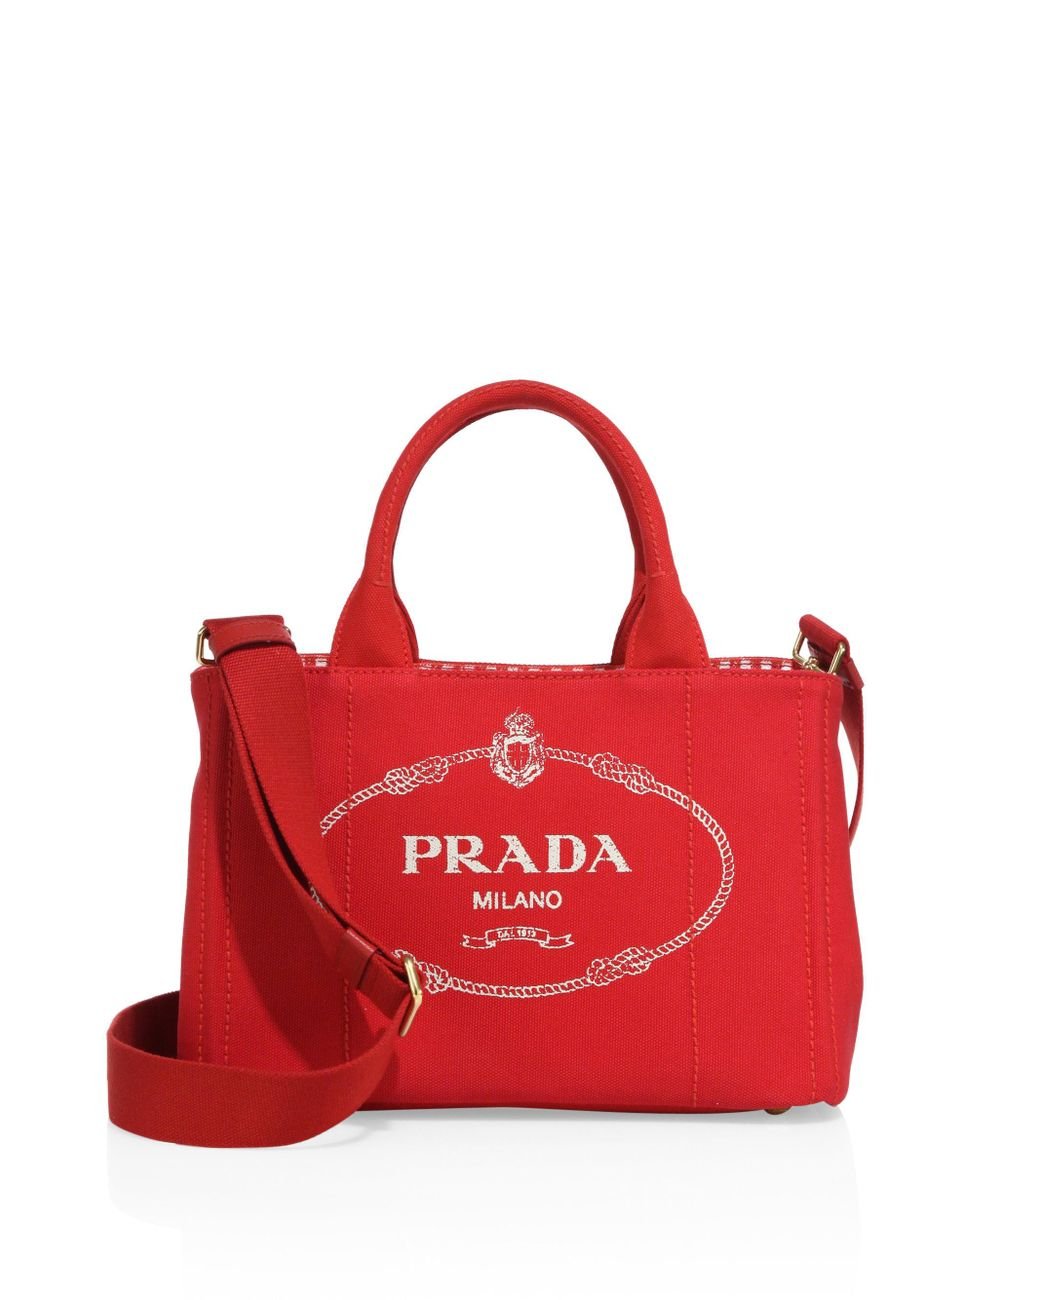 Prada Canapa Canvas Tote in Red | Lyst